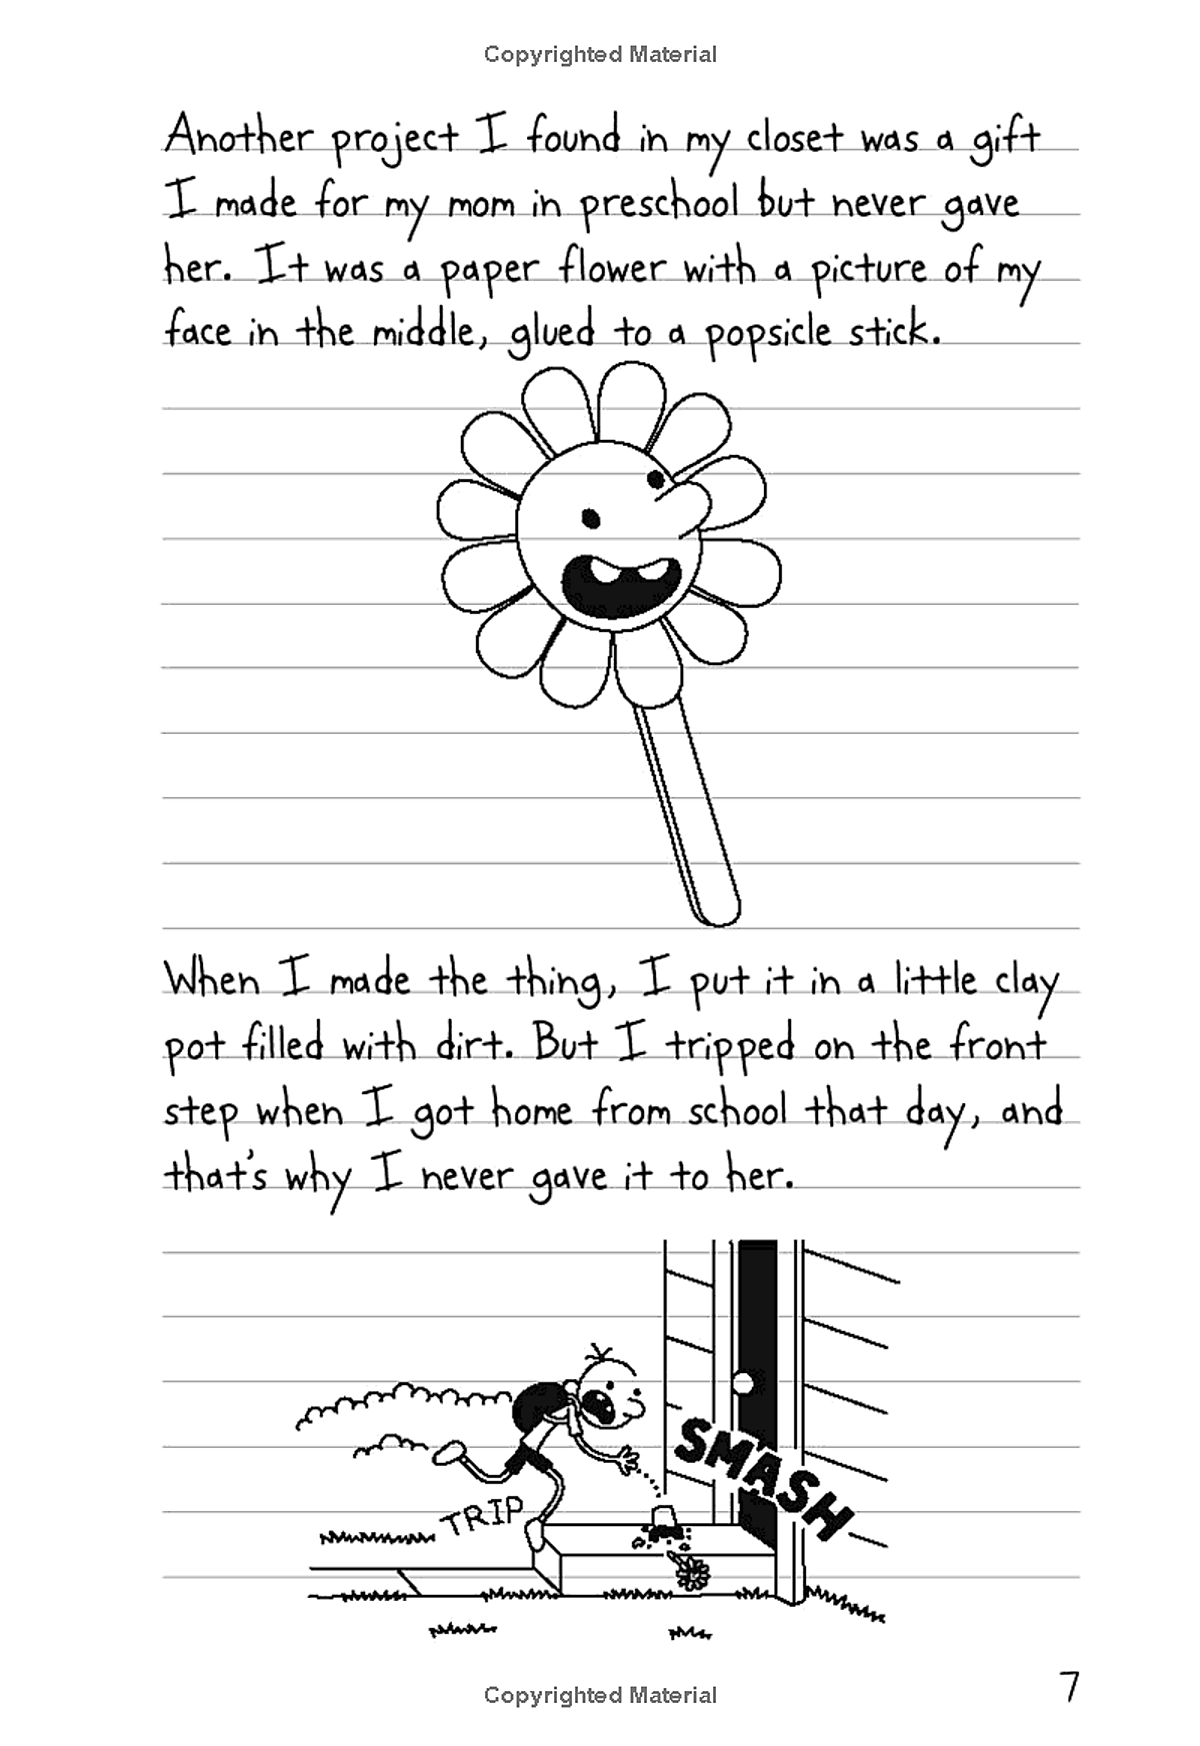 Diary Of A Wimpy Kid 14: Wrecking Ball